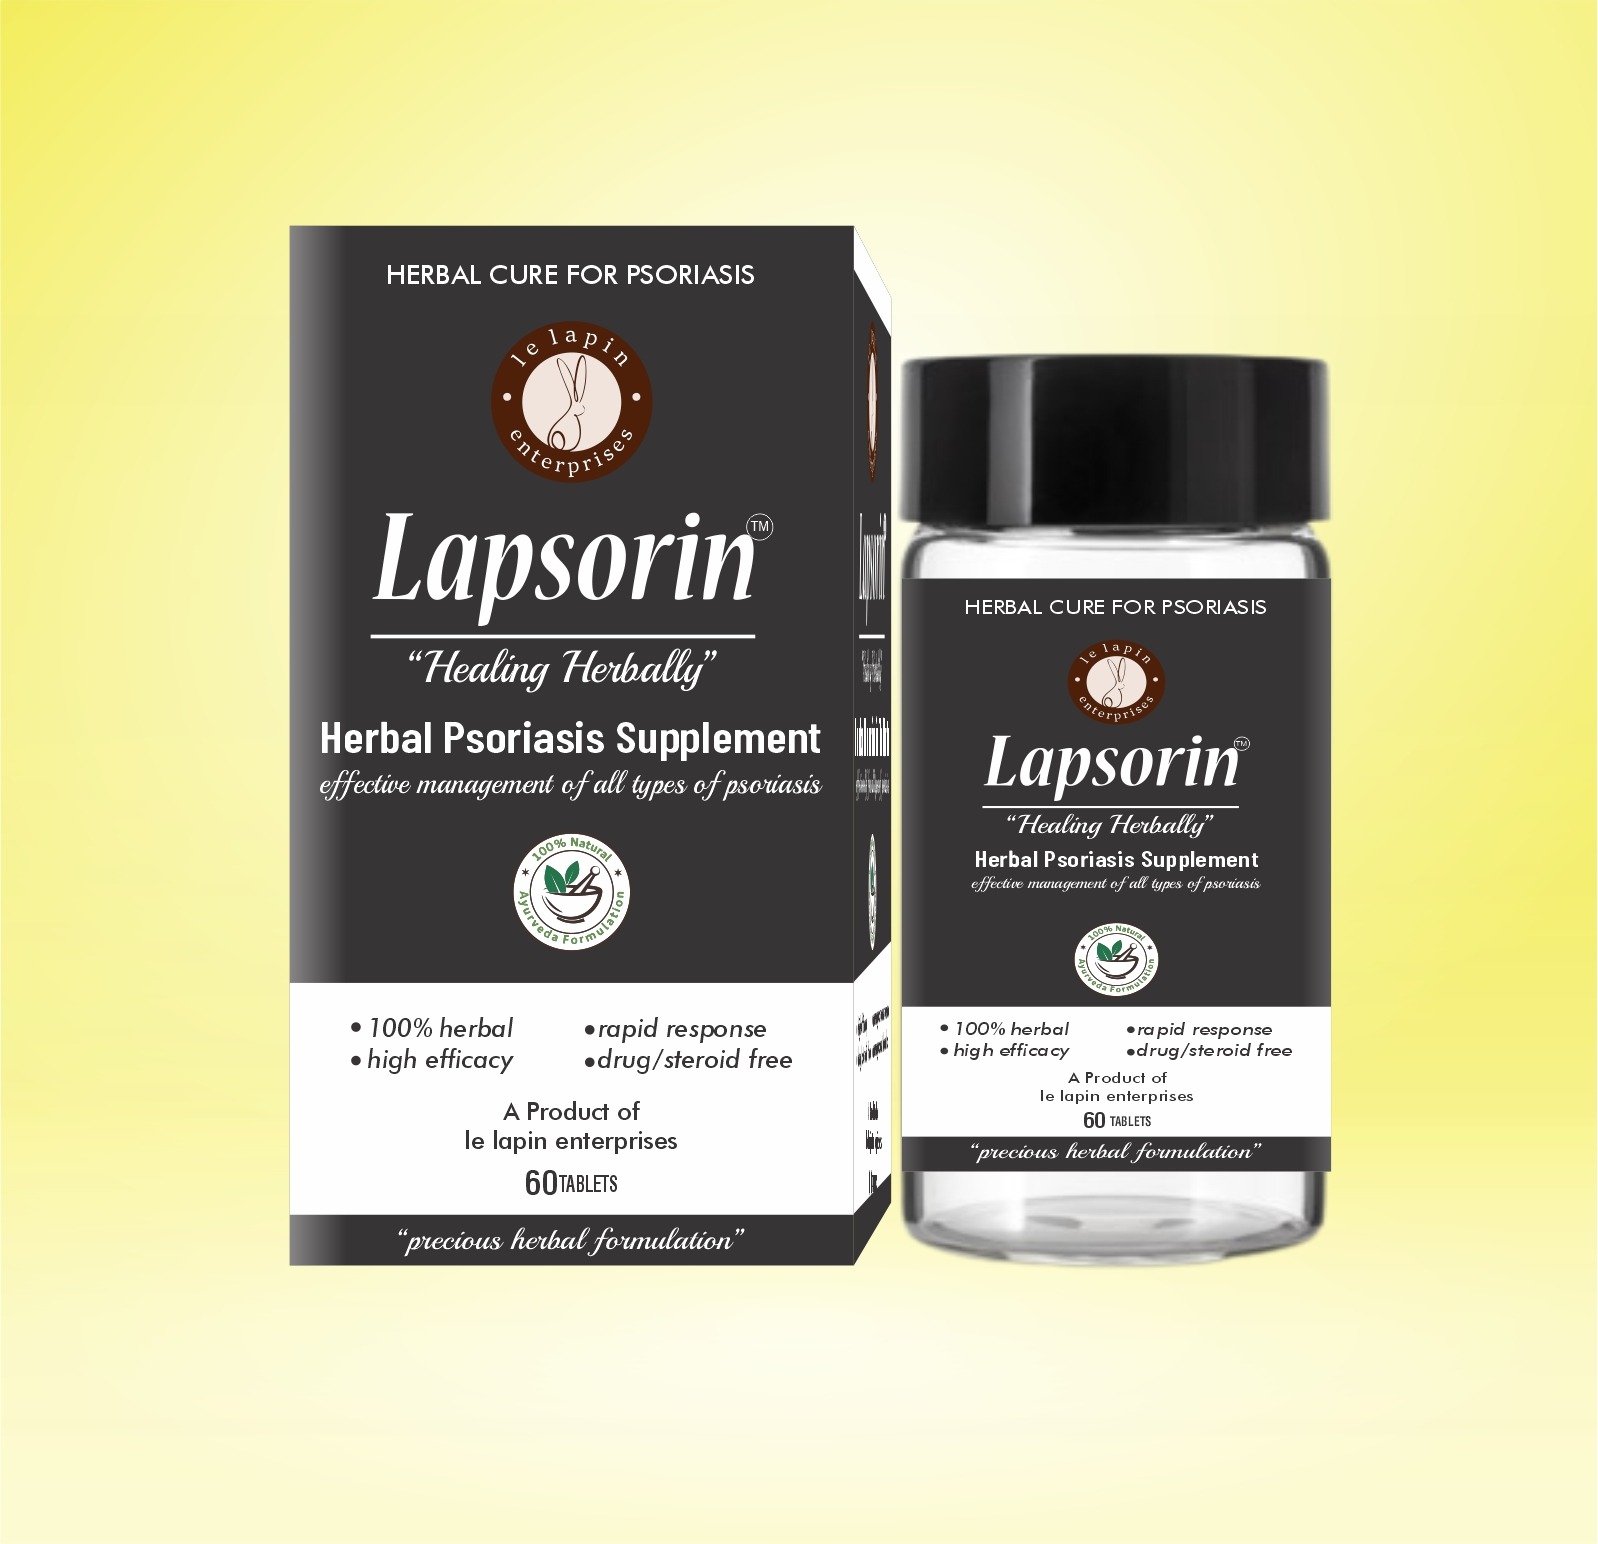 Natural treatment for plaque psoriasis with lapsorin psoriasis products